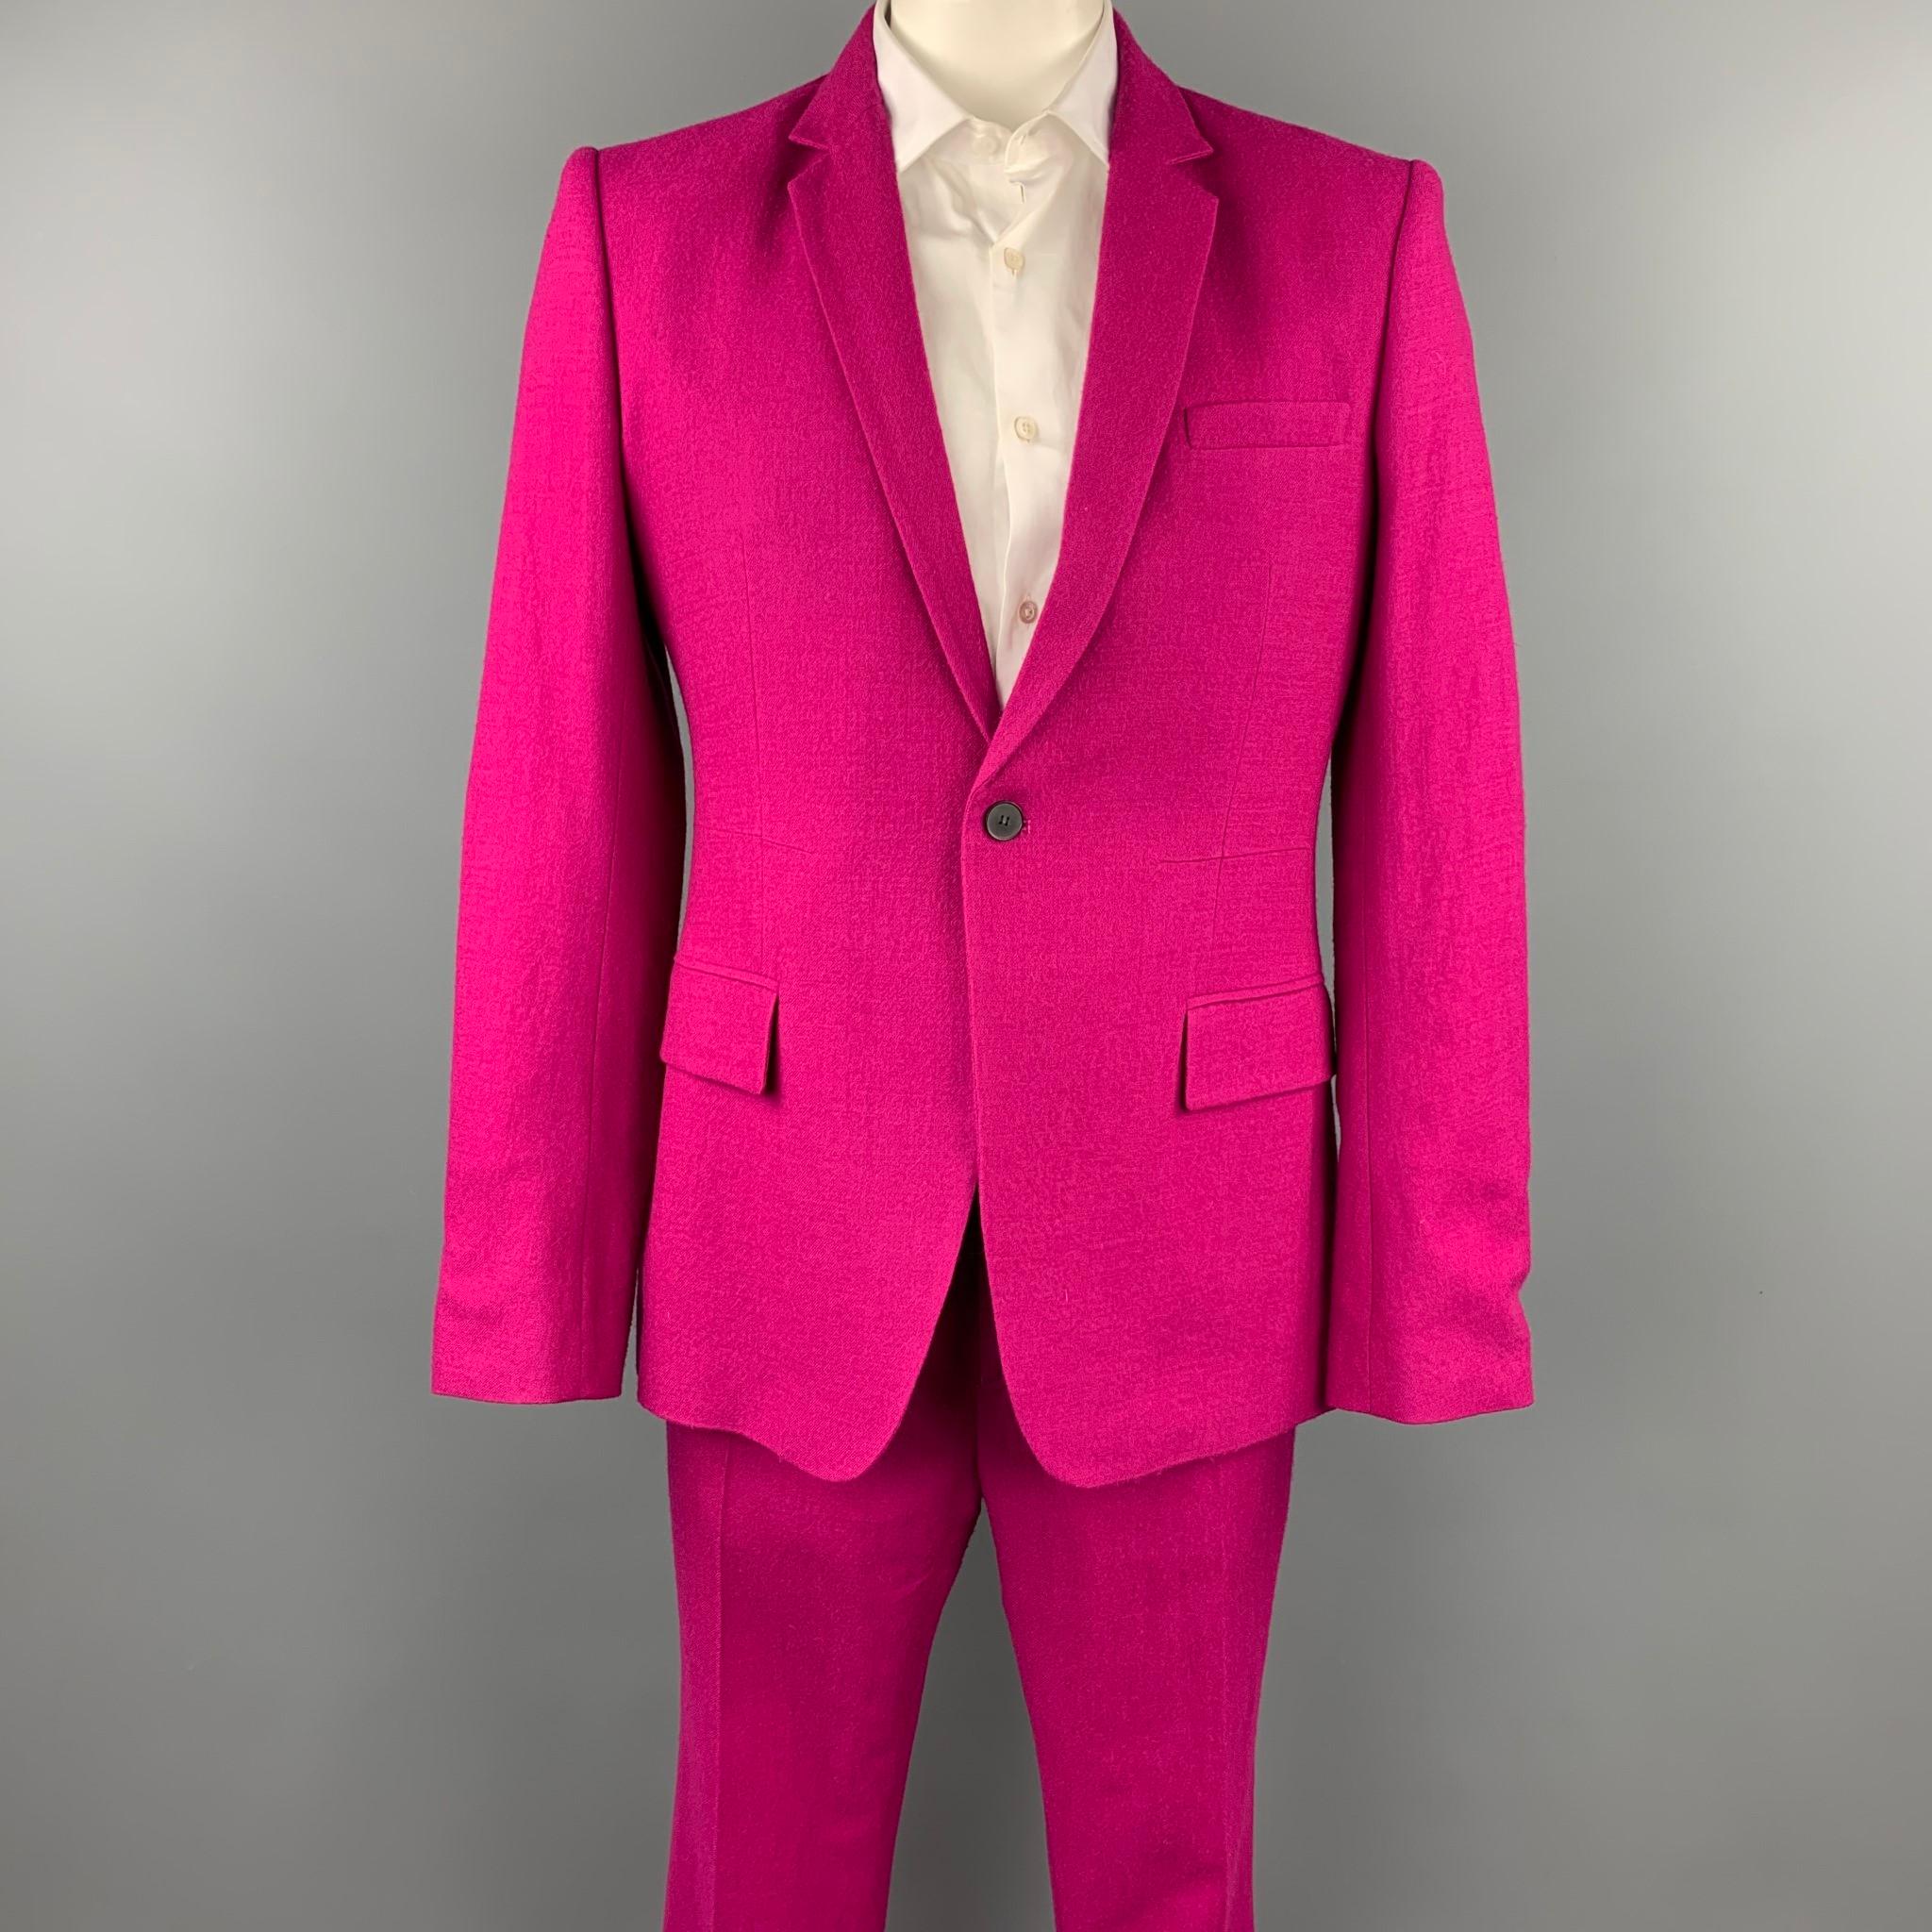 HAIDER ACKERMANN suit comes in a raspberry wool with a full liner and includes a single breasted, single button sport coat with a notch lapel and matching flat front trousers. Made in Romania.

Very Good Pre-Owned Condition.
Marked: EU